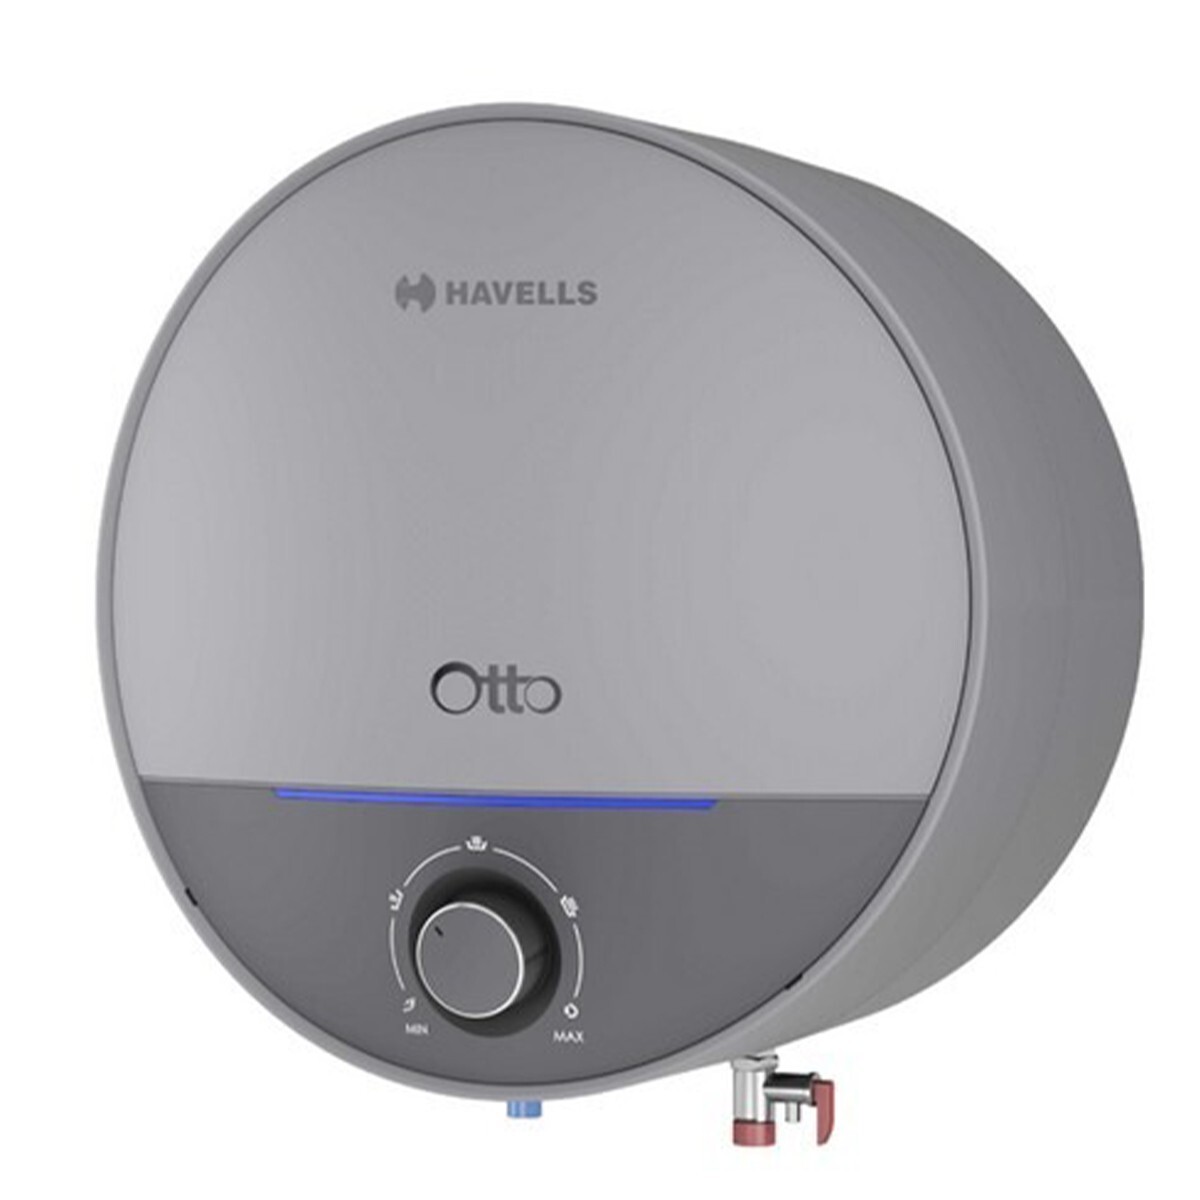 Havells 10L Water Heater Otto Silver Gray 5S